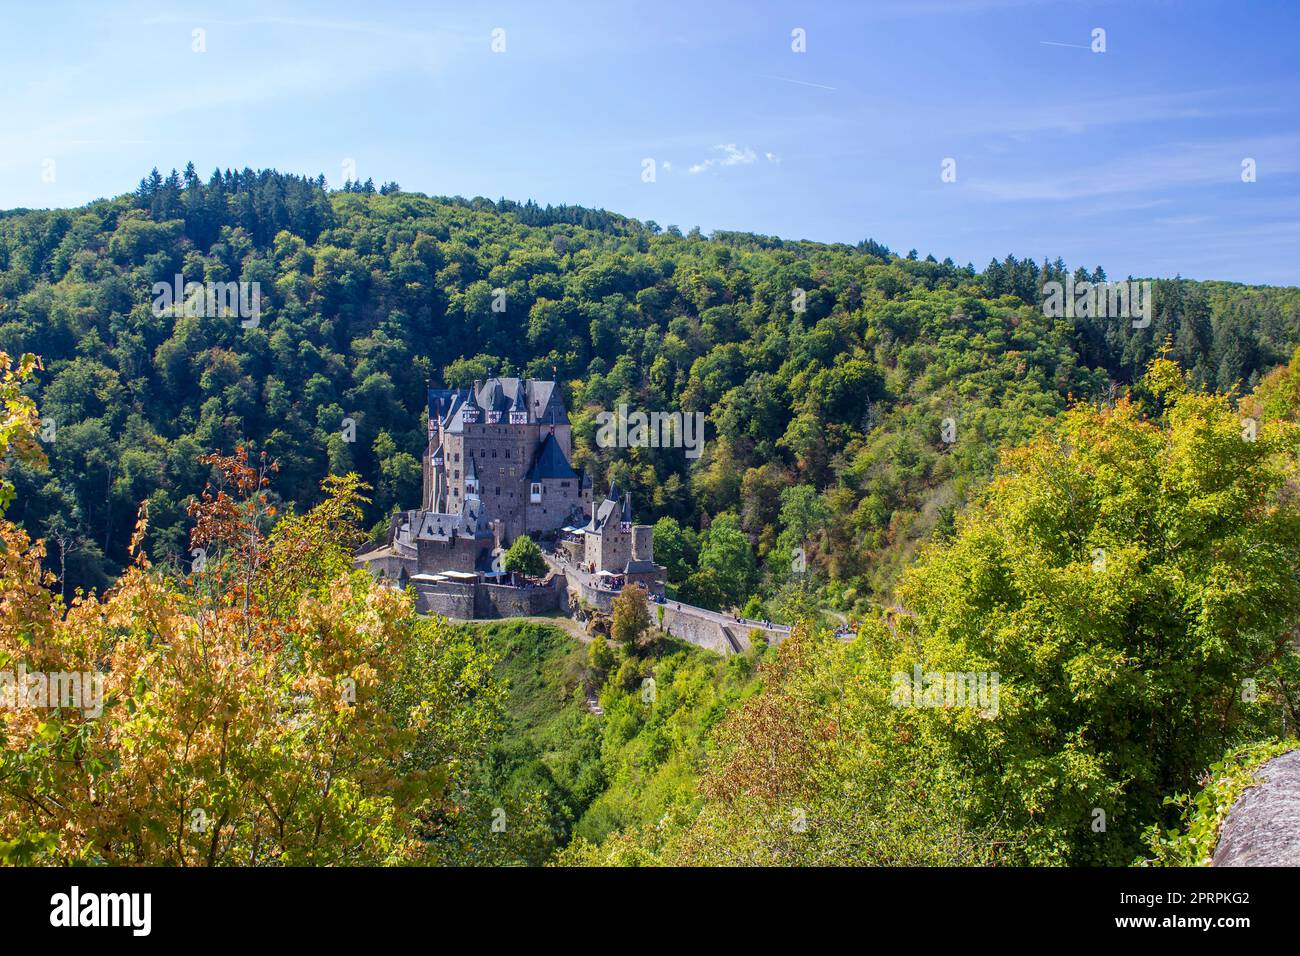 Castle Eltz located on the hill in Moselle valley, Germany Stock Photo